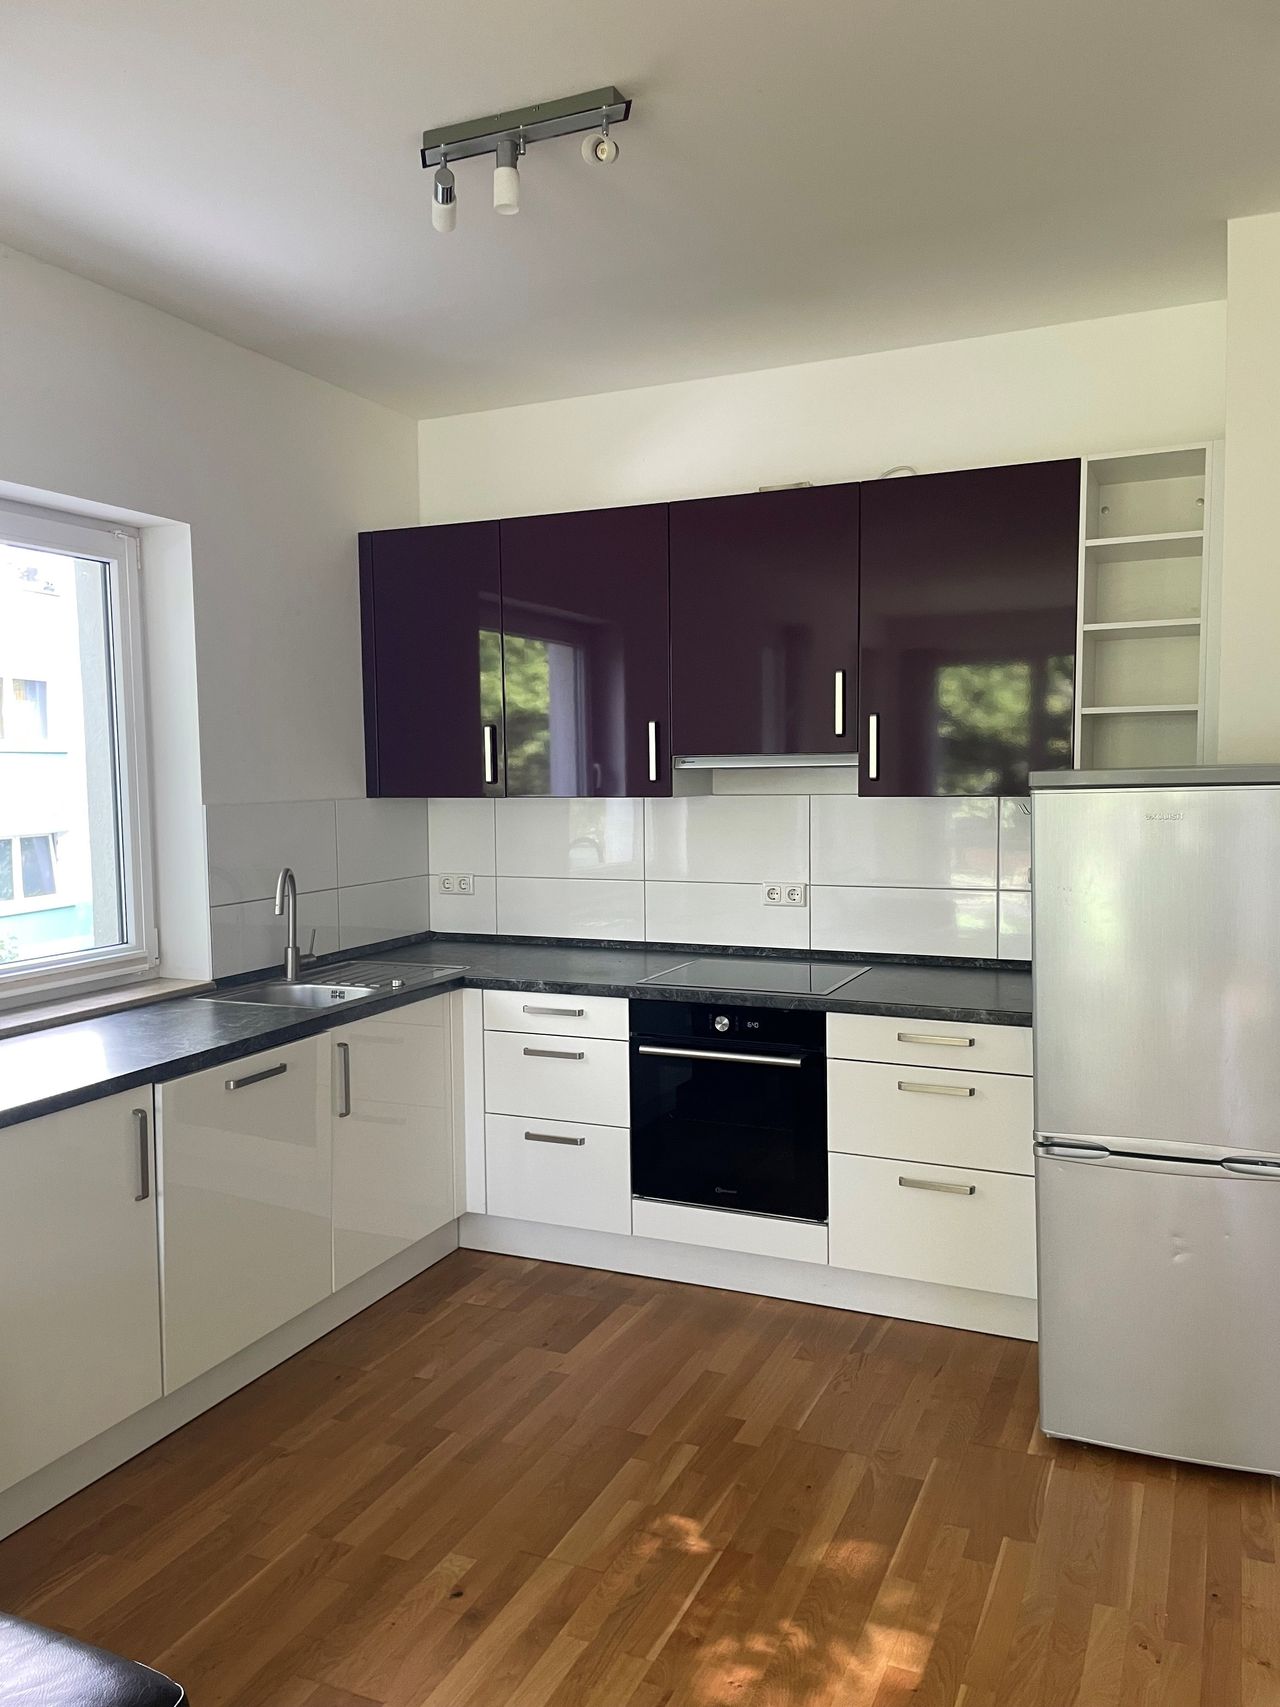 Partly furnished flat in Lichtenberg - Temporary from now on